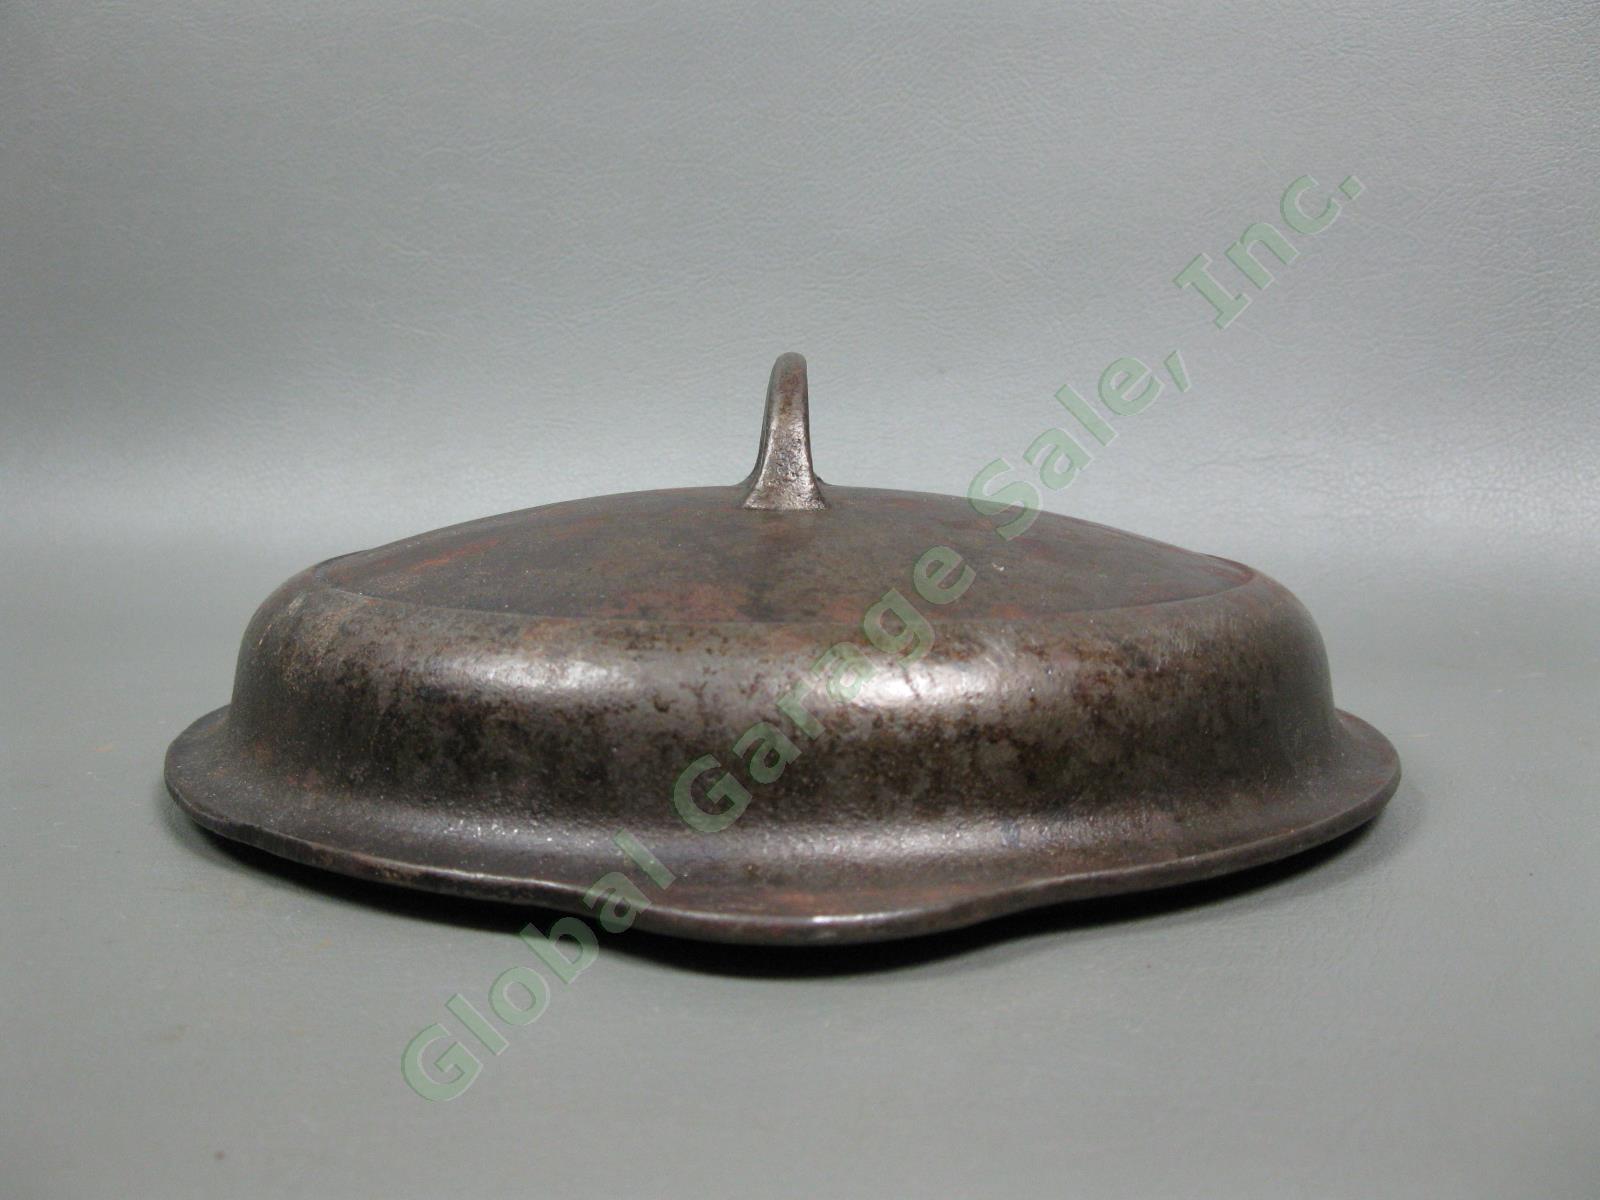 Vintage Griswold No-5 1095 Cast Iron Self-Basting Dutch Oven Lid Cover Cookware 6